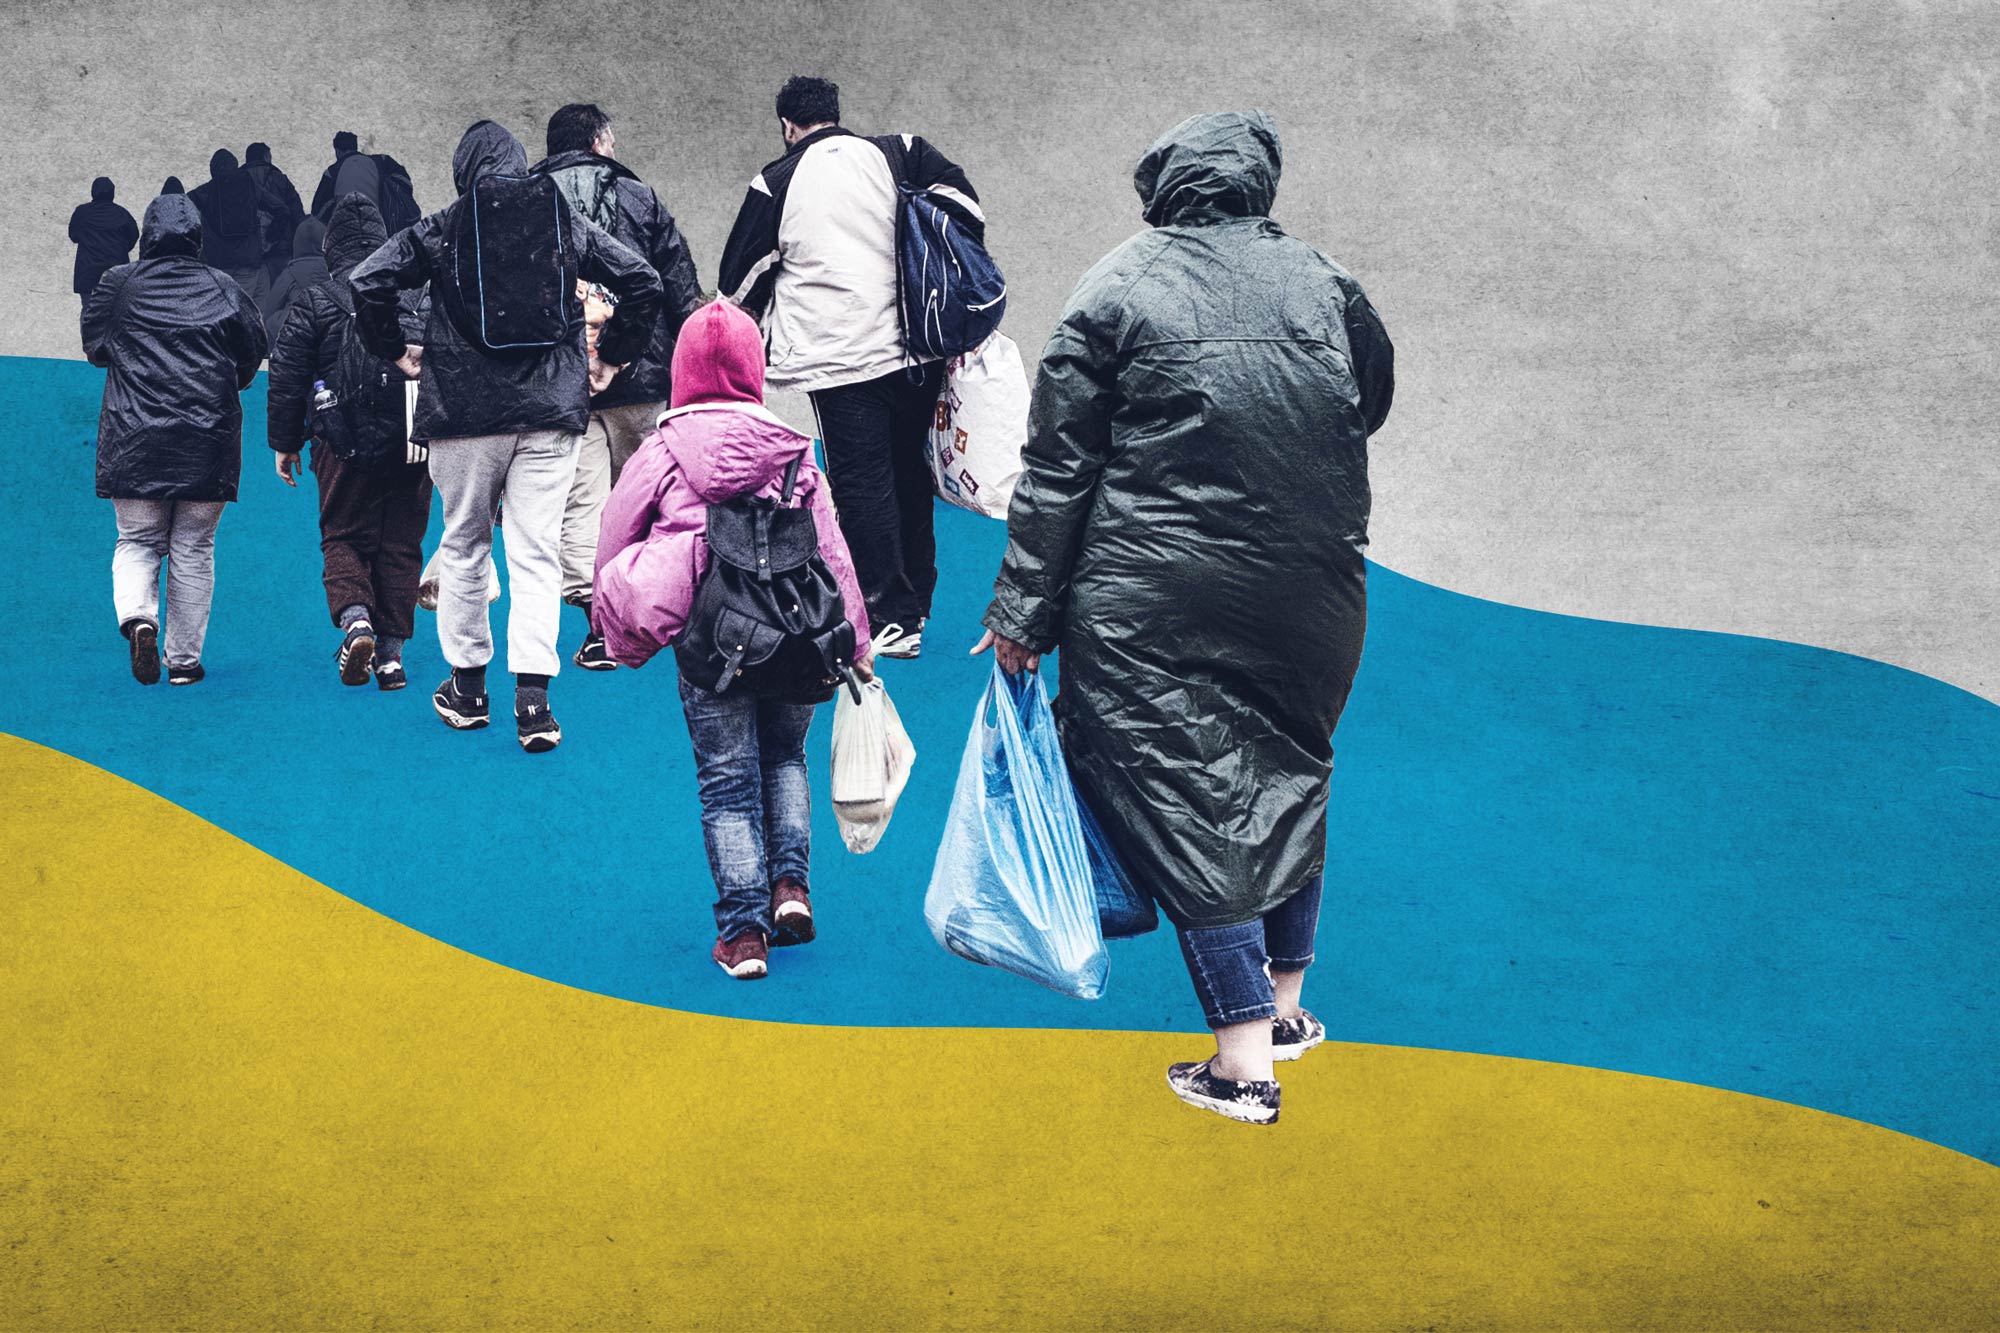 A line of people in coats holding plastic bags, walking on a blue and yellow background.